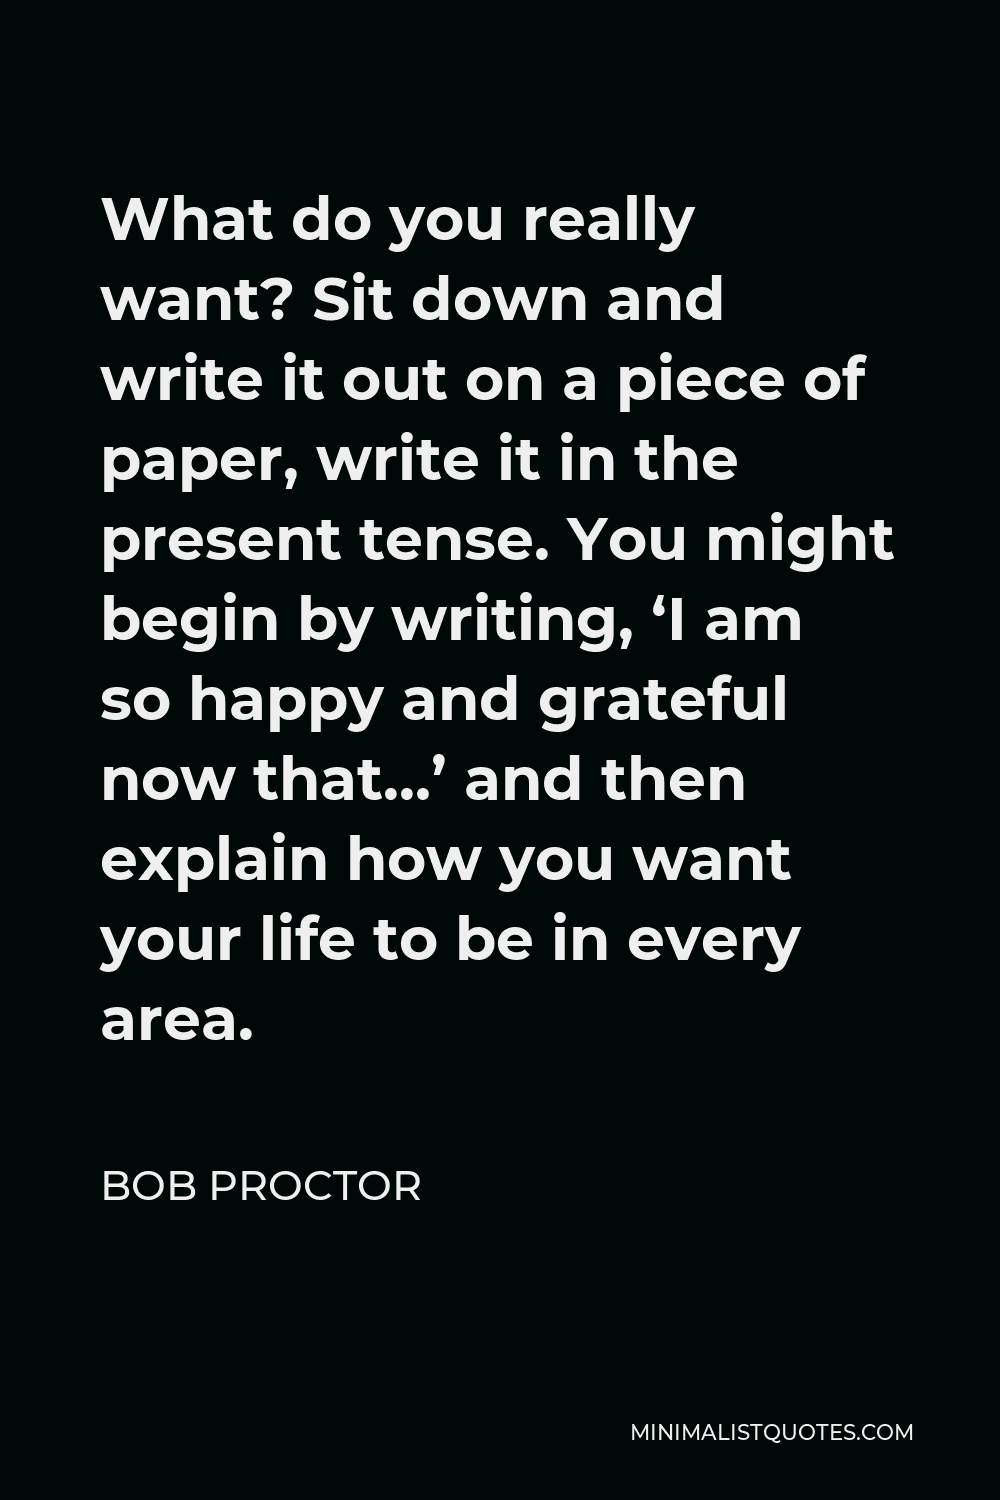 Bob Proctor Quote - What do you really want? Sit down and write it out on a piece of paper, write it in the present tense. You might begin by writing, ‘I am so happy and grateful now that…’ and then explain how you want your life to be in every area.